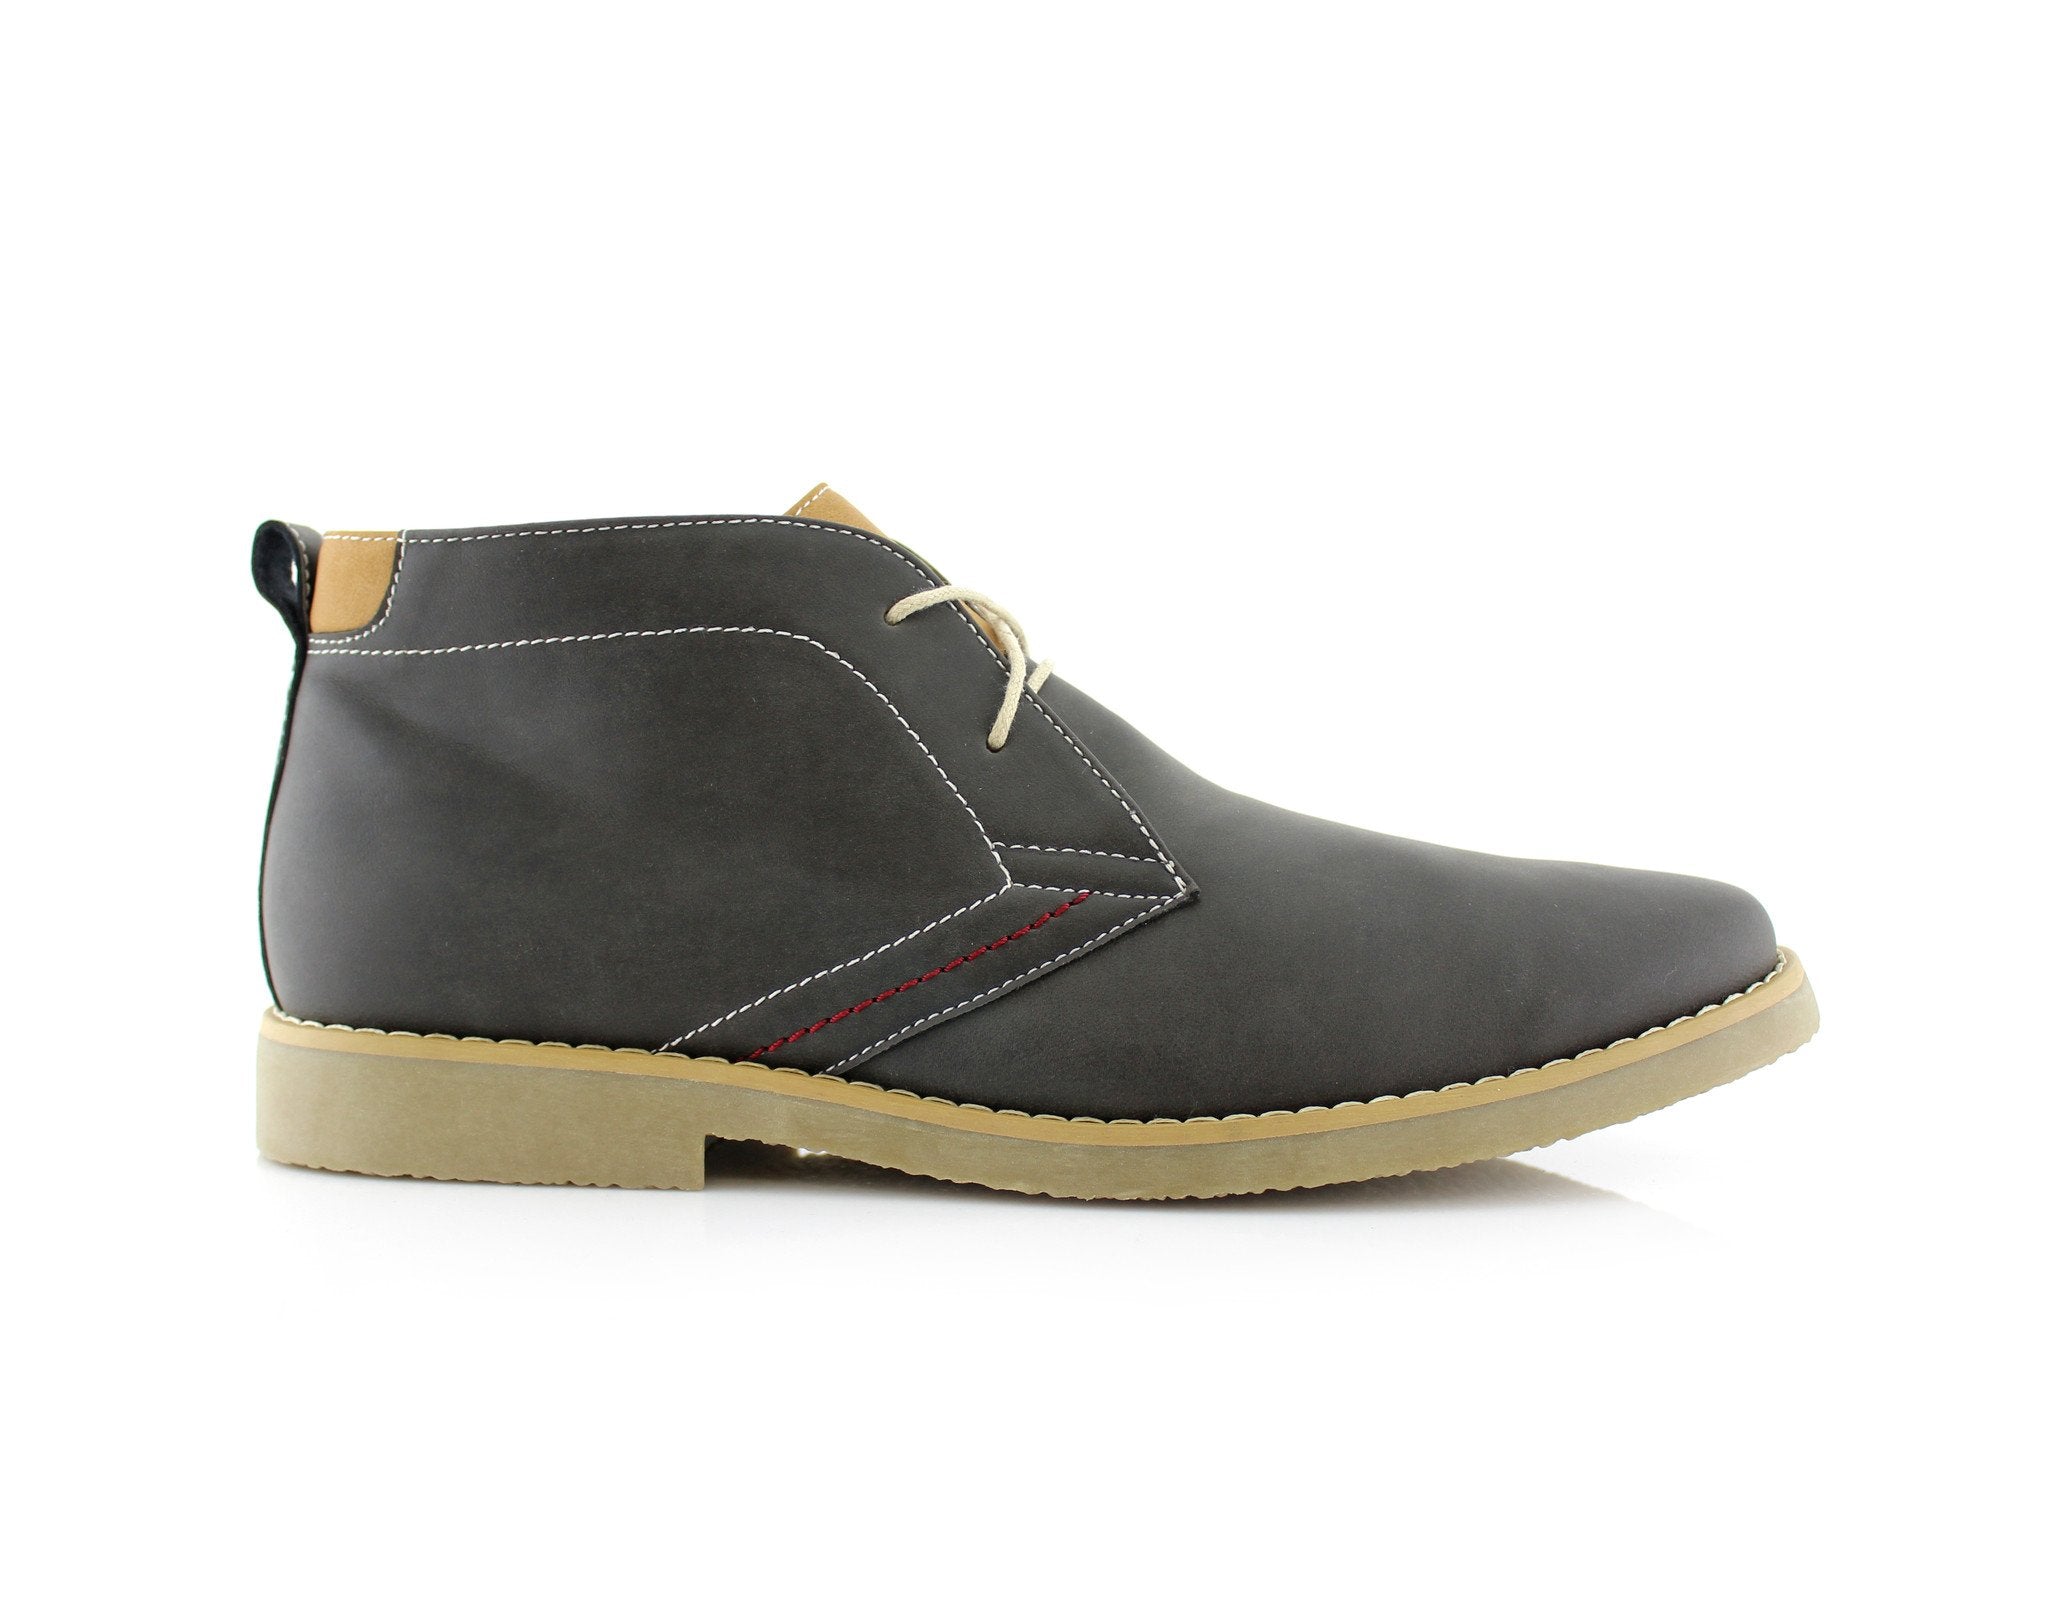 Classic Chukka Boots | Elliot by Polar Fox | Conal Footwear | Outer Side Angle View